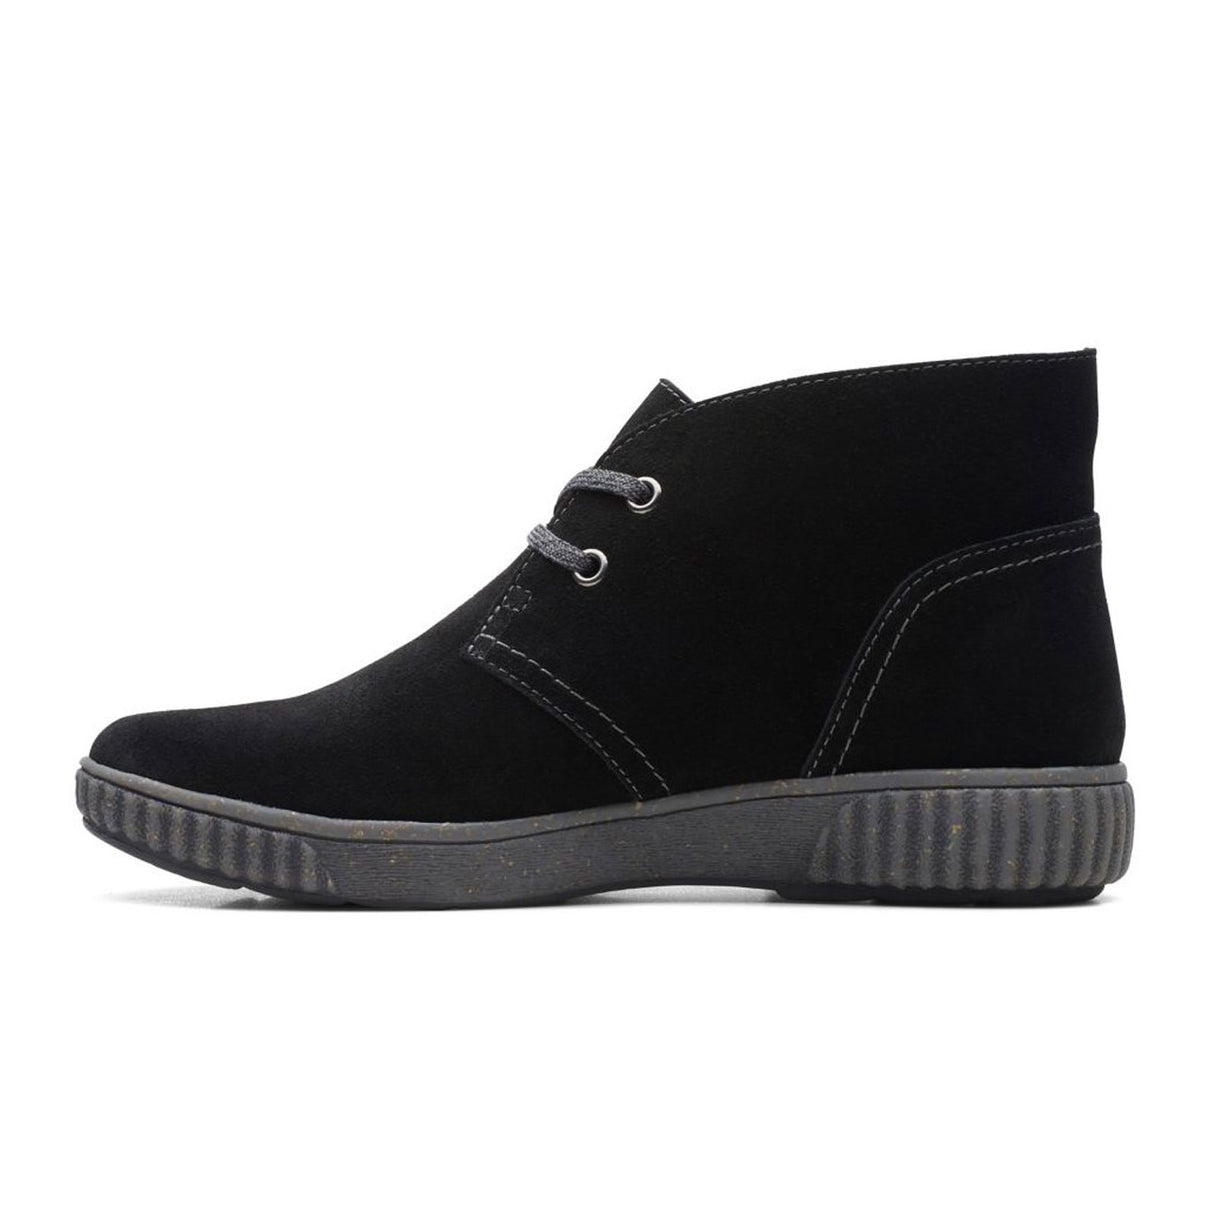 Clarks Magnolia Charm Ankle Boot (Women) - Black Suede Boots - Fashion - Ankle Boot - The Heel Shoe Fitters